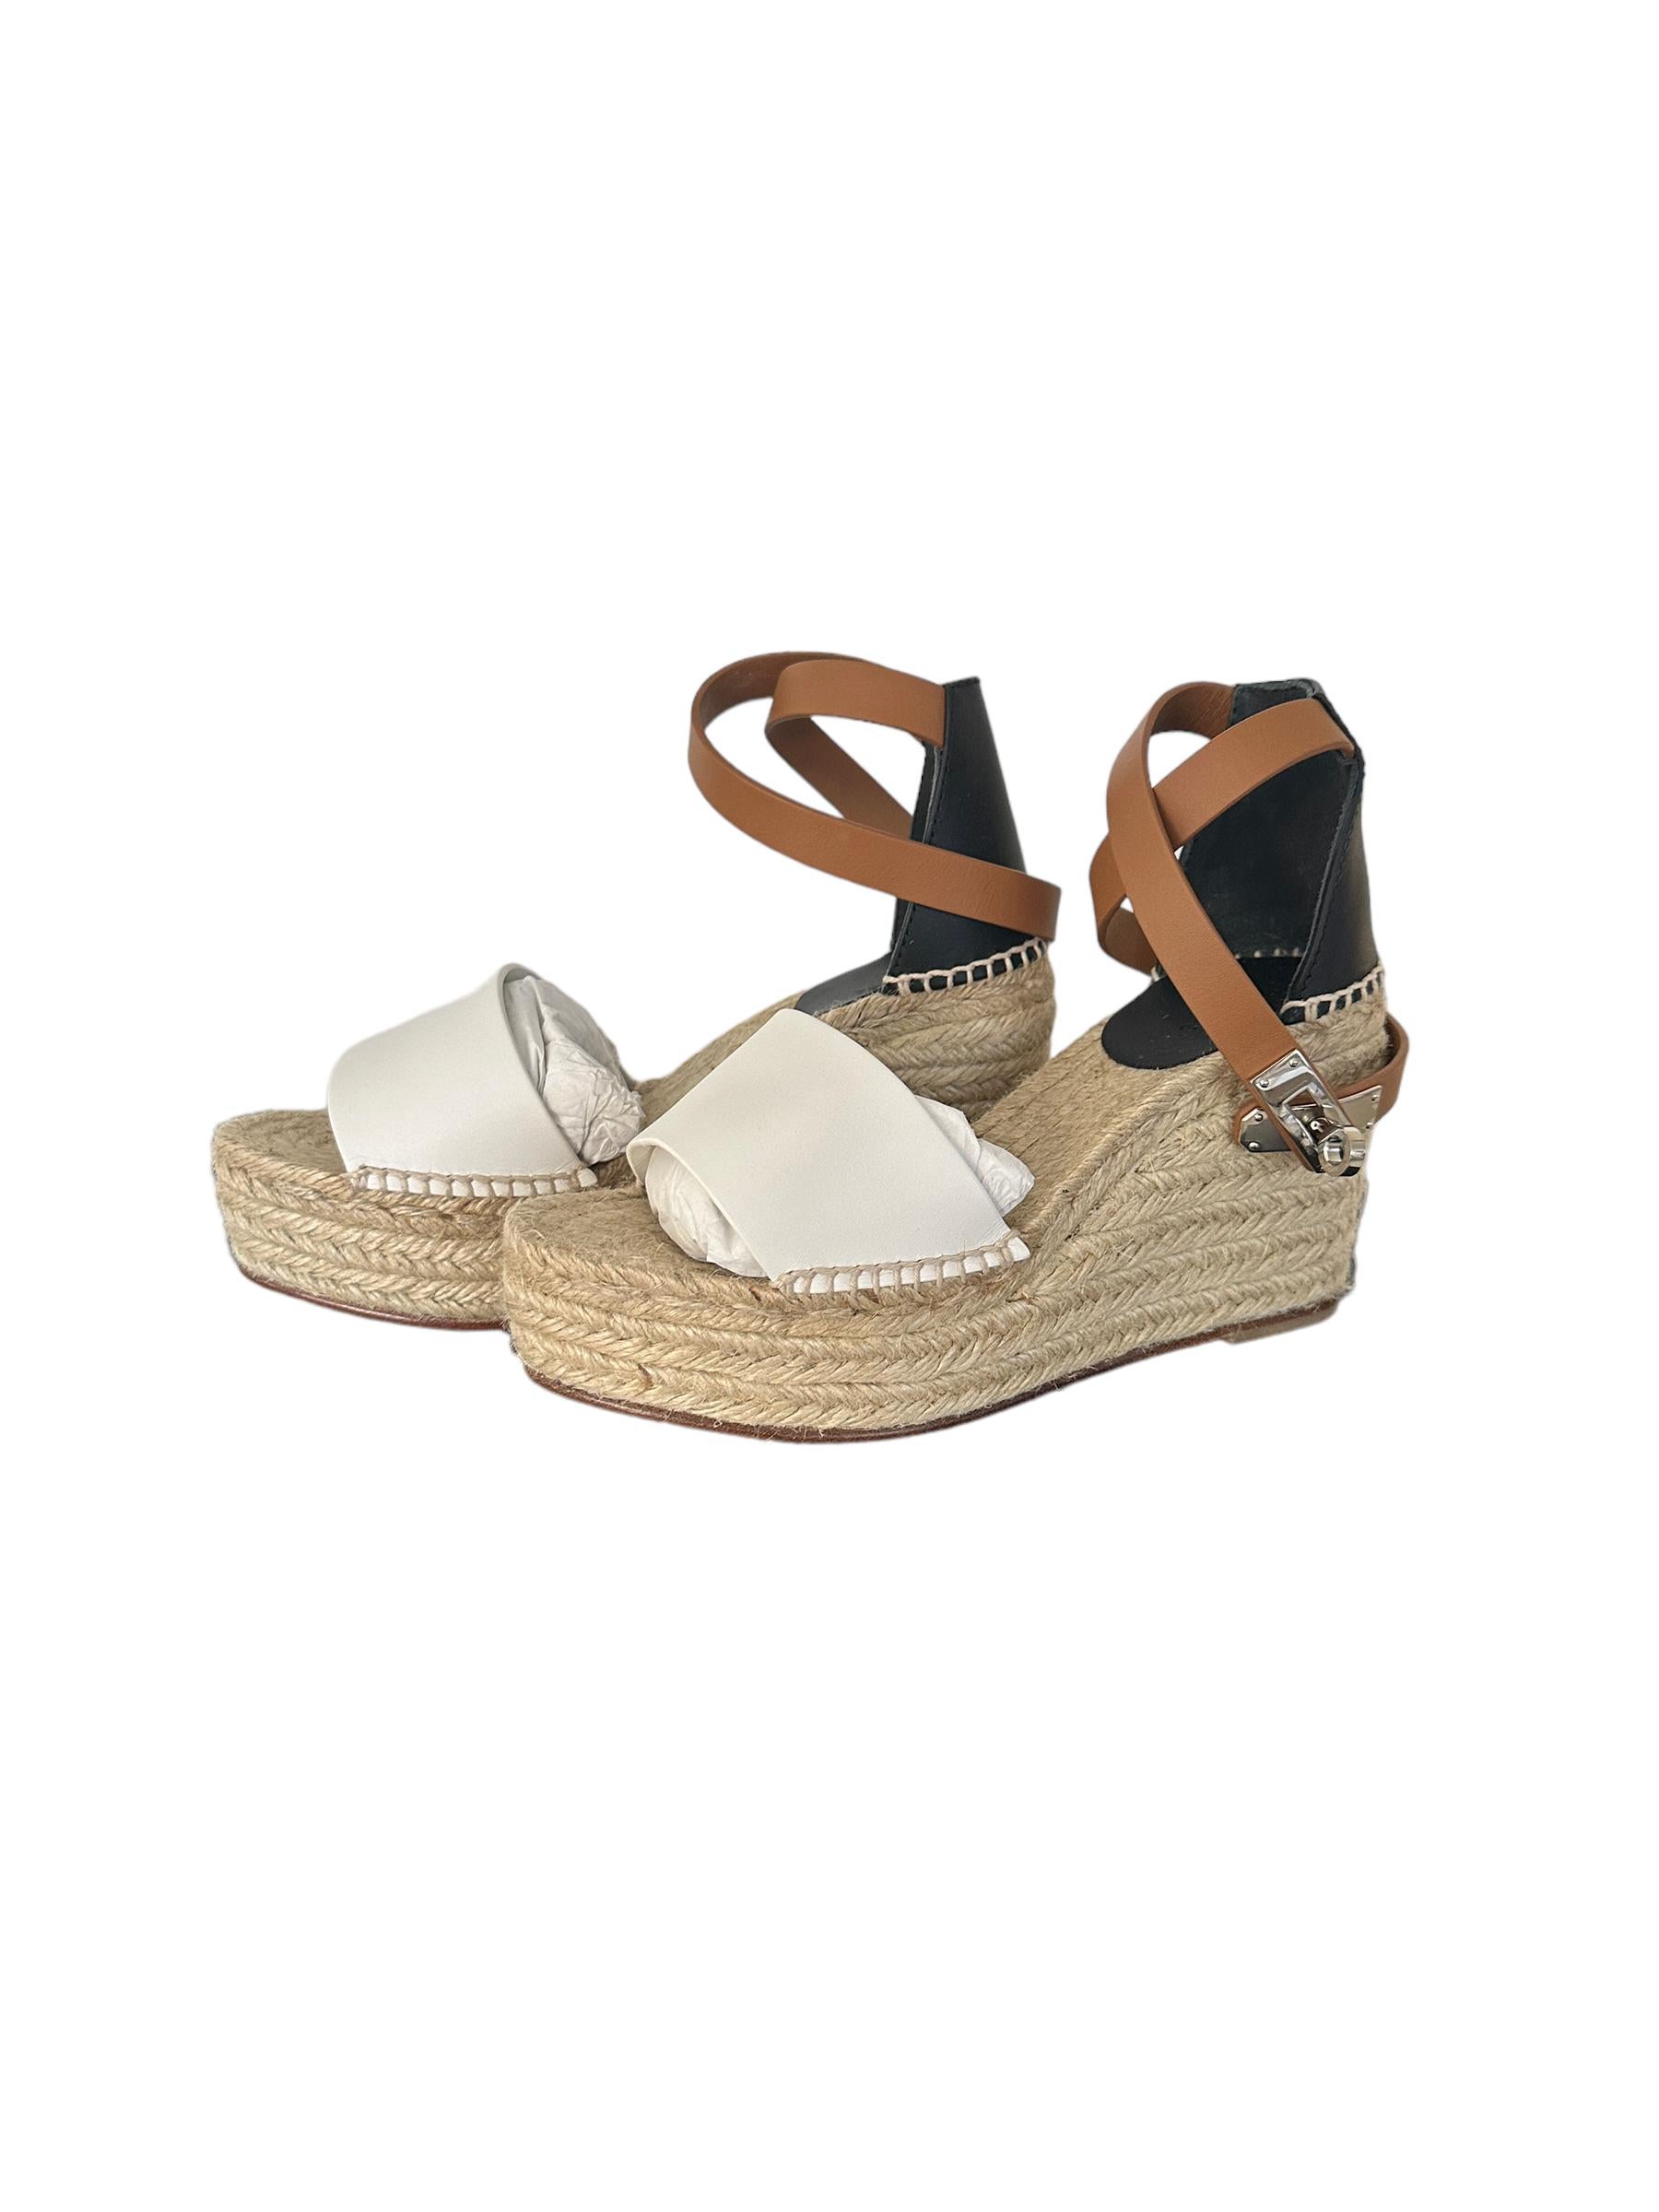 HERMES Tipoli Espadrille Wedge Sandals Size 35 New in Box 1